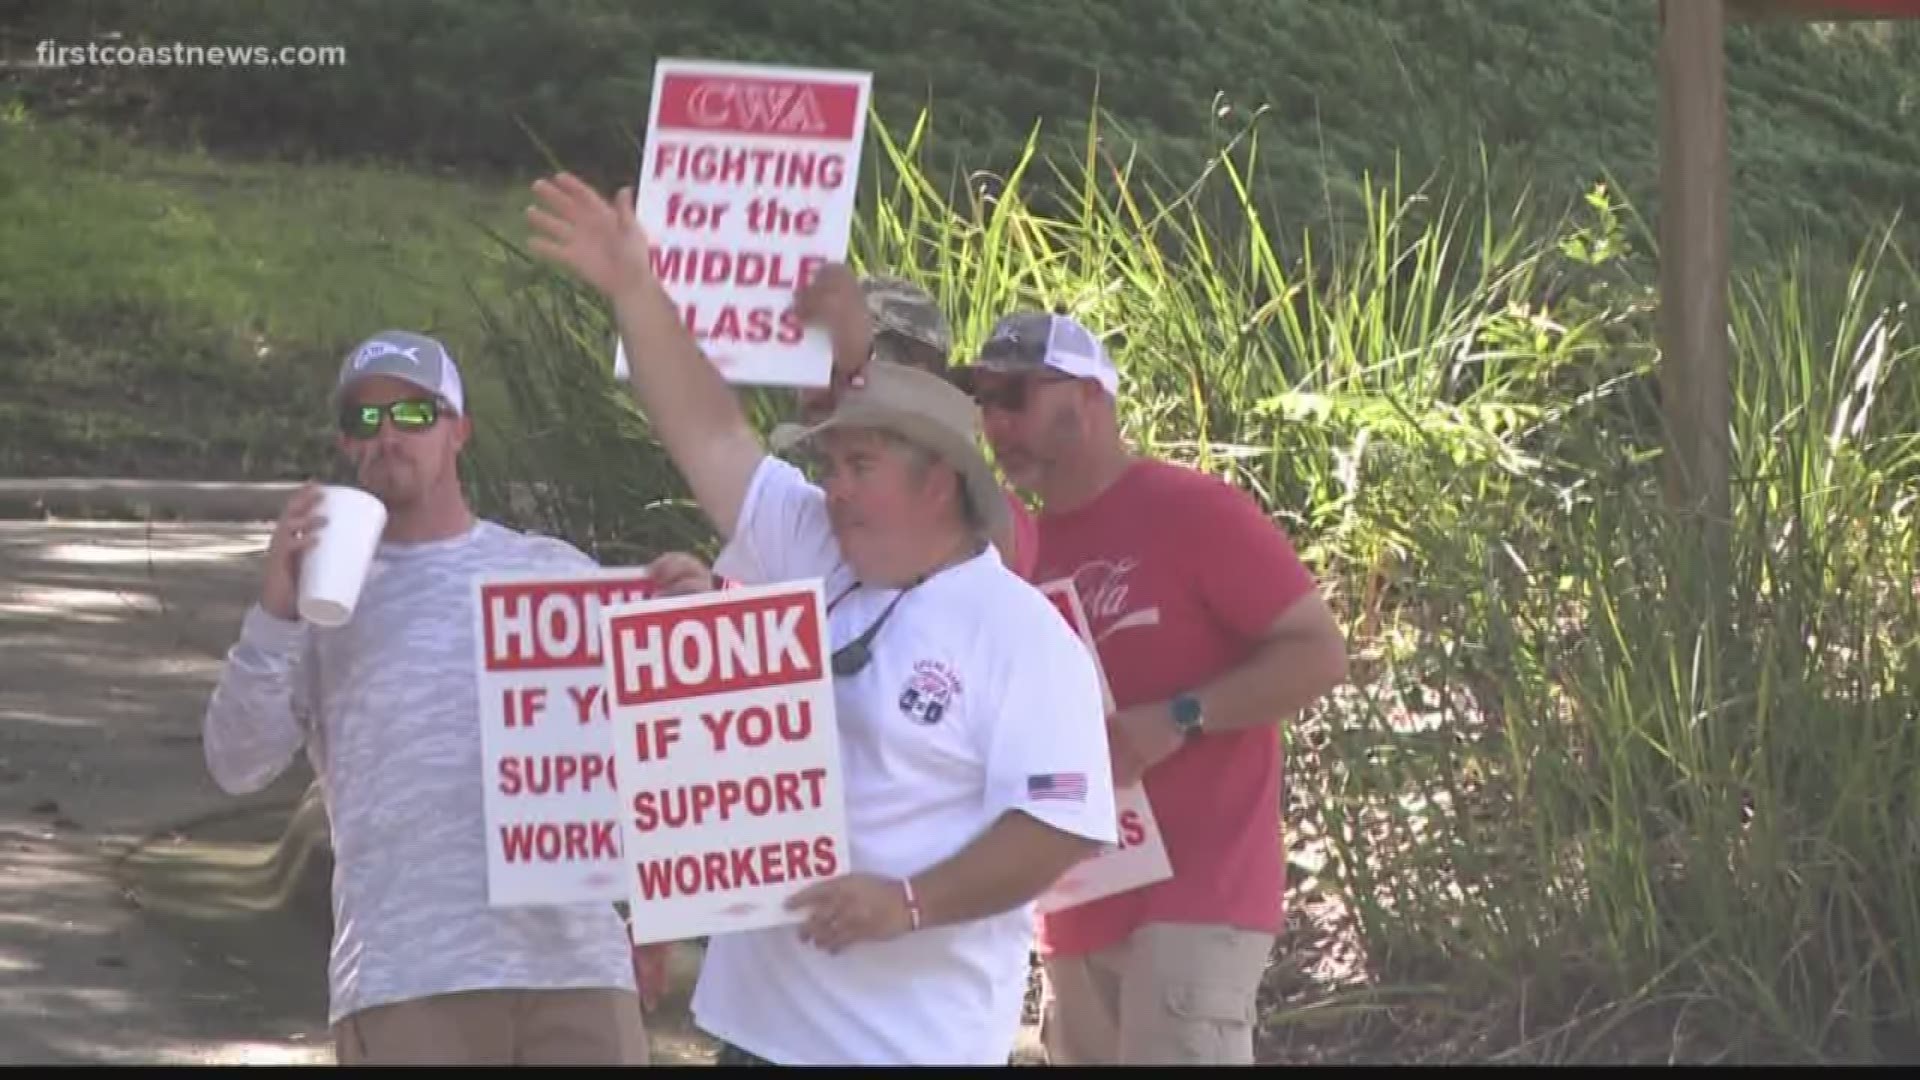 Local Union President, Eric Bunke, told First Coast News, employees are fed up with "unfair labor practices." Bunke added that the company is not operating in good faith and customers may be impacted until an agreement is made.